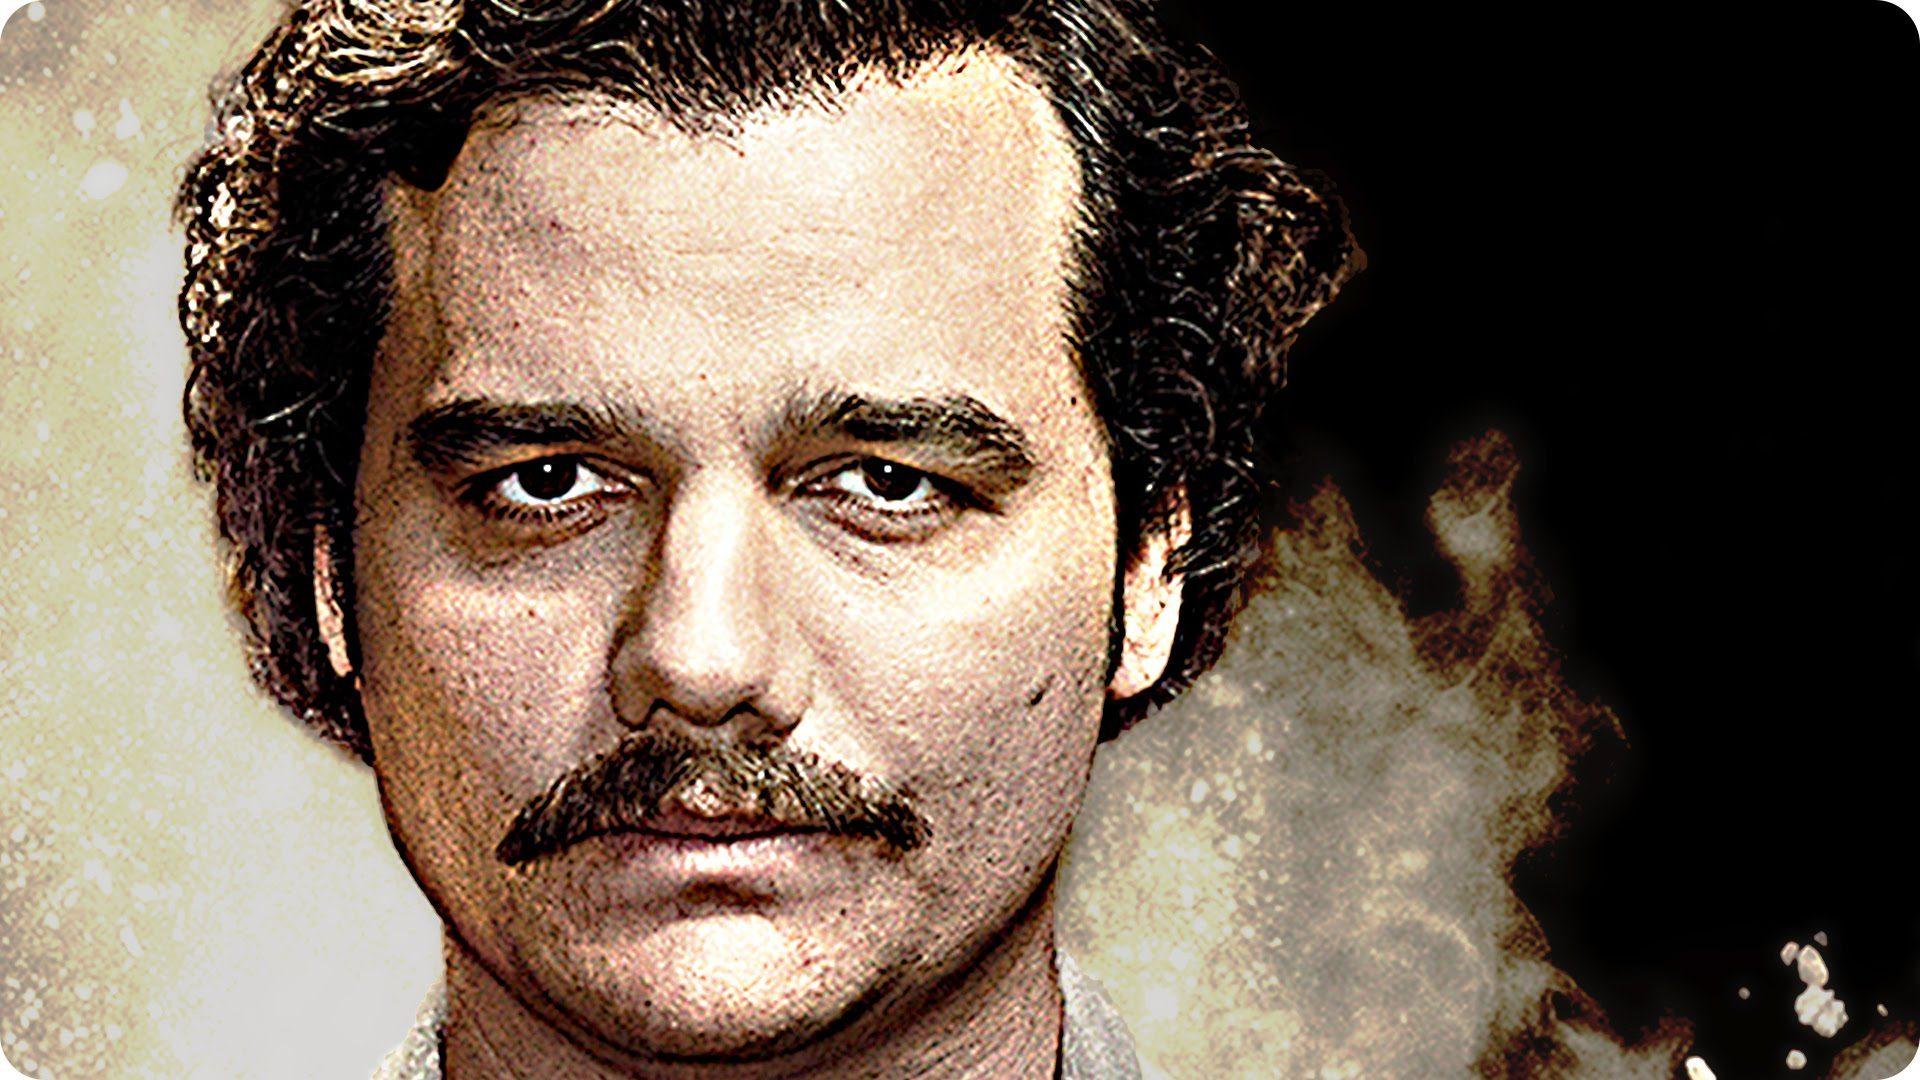 High Definition Wallpaper Of Wagner Moura As Pablo